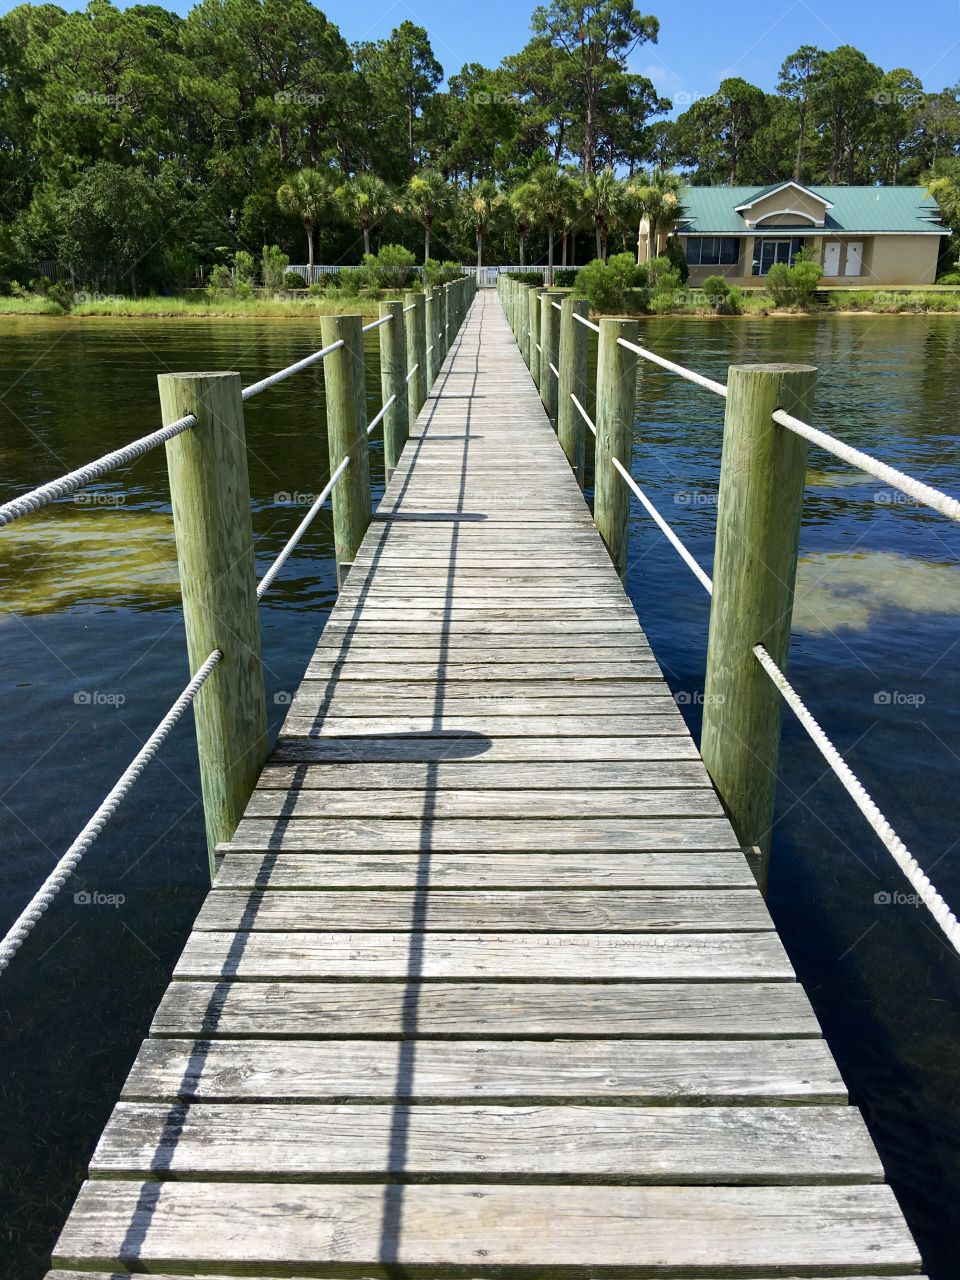 A footbridge over water leading to a house